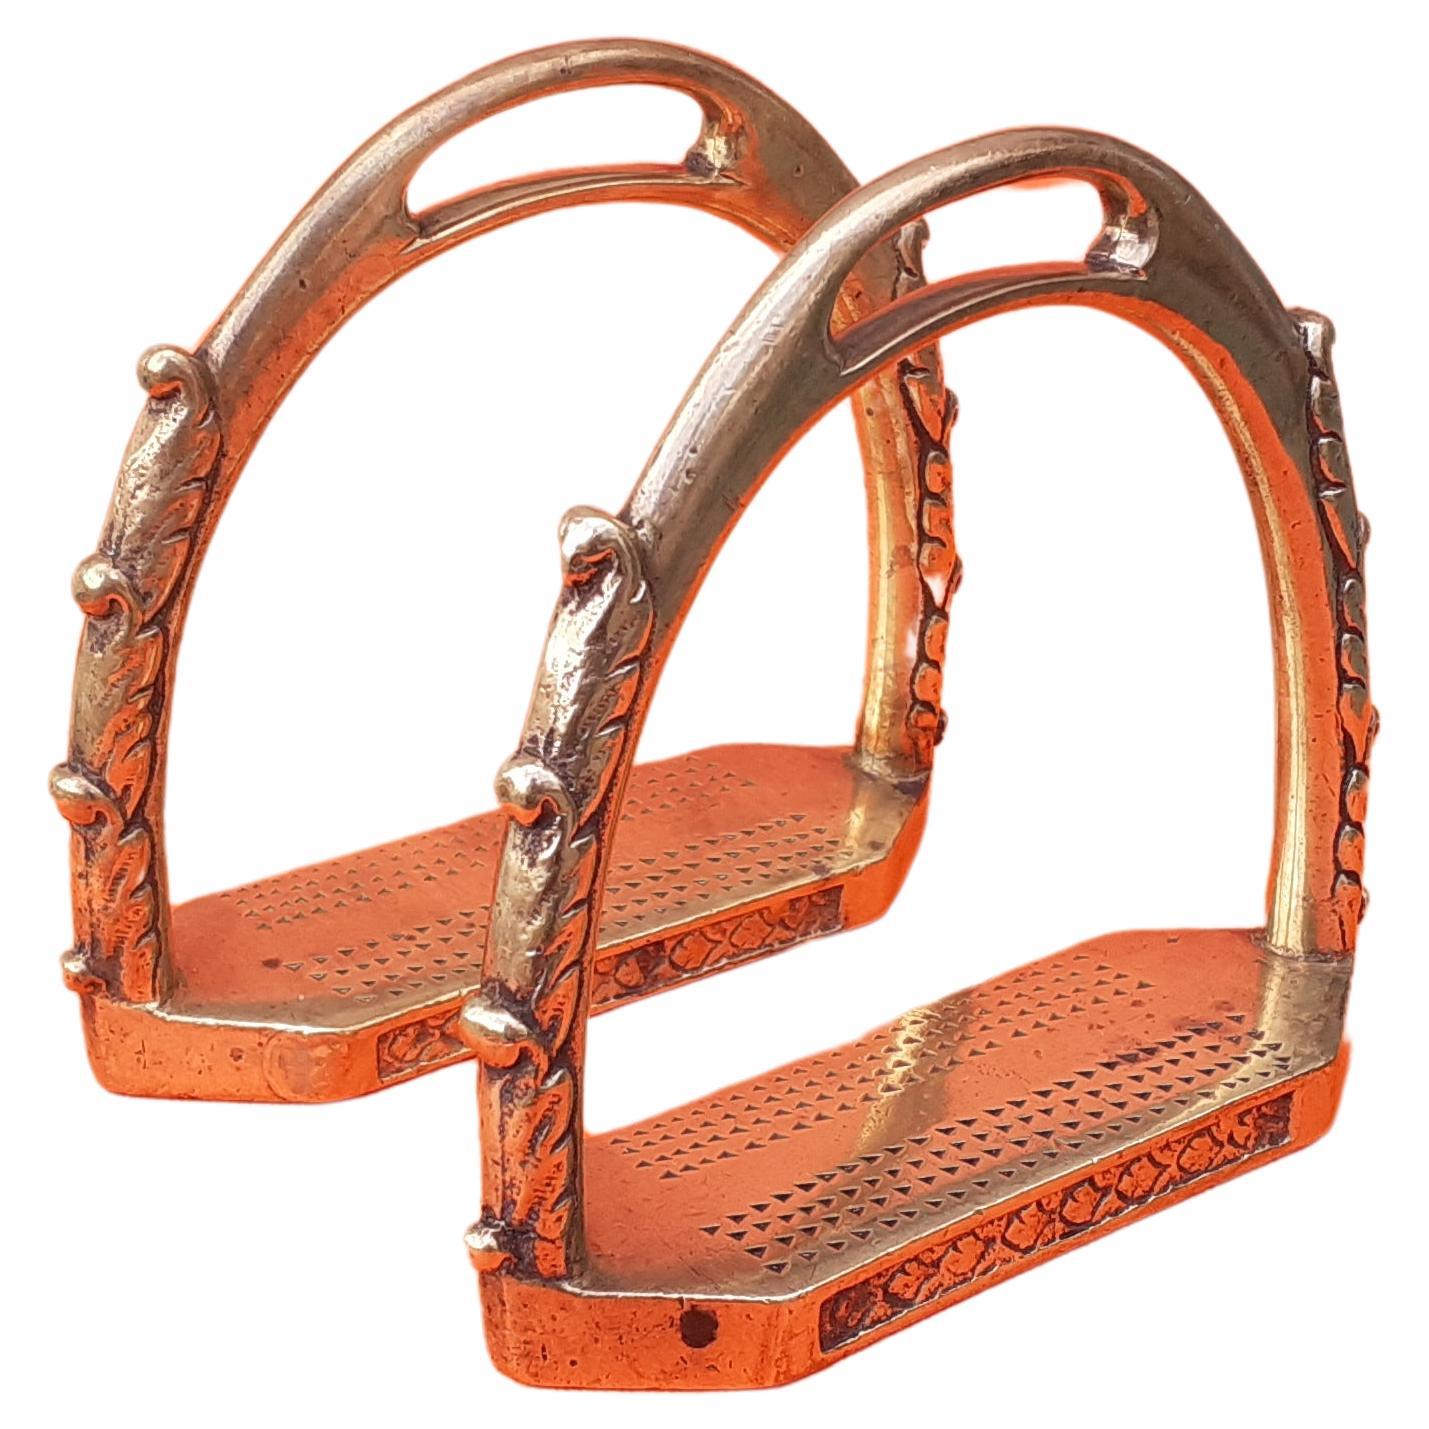 Exceptional Hermès Pair of Chiseled Bronze Stirrups Horse Ridding Texas For Sale